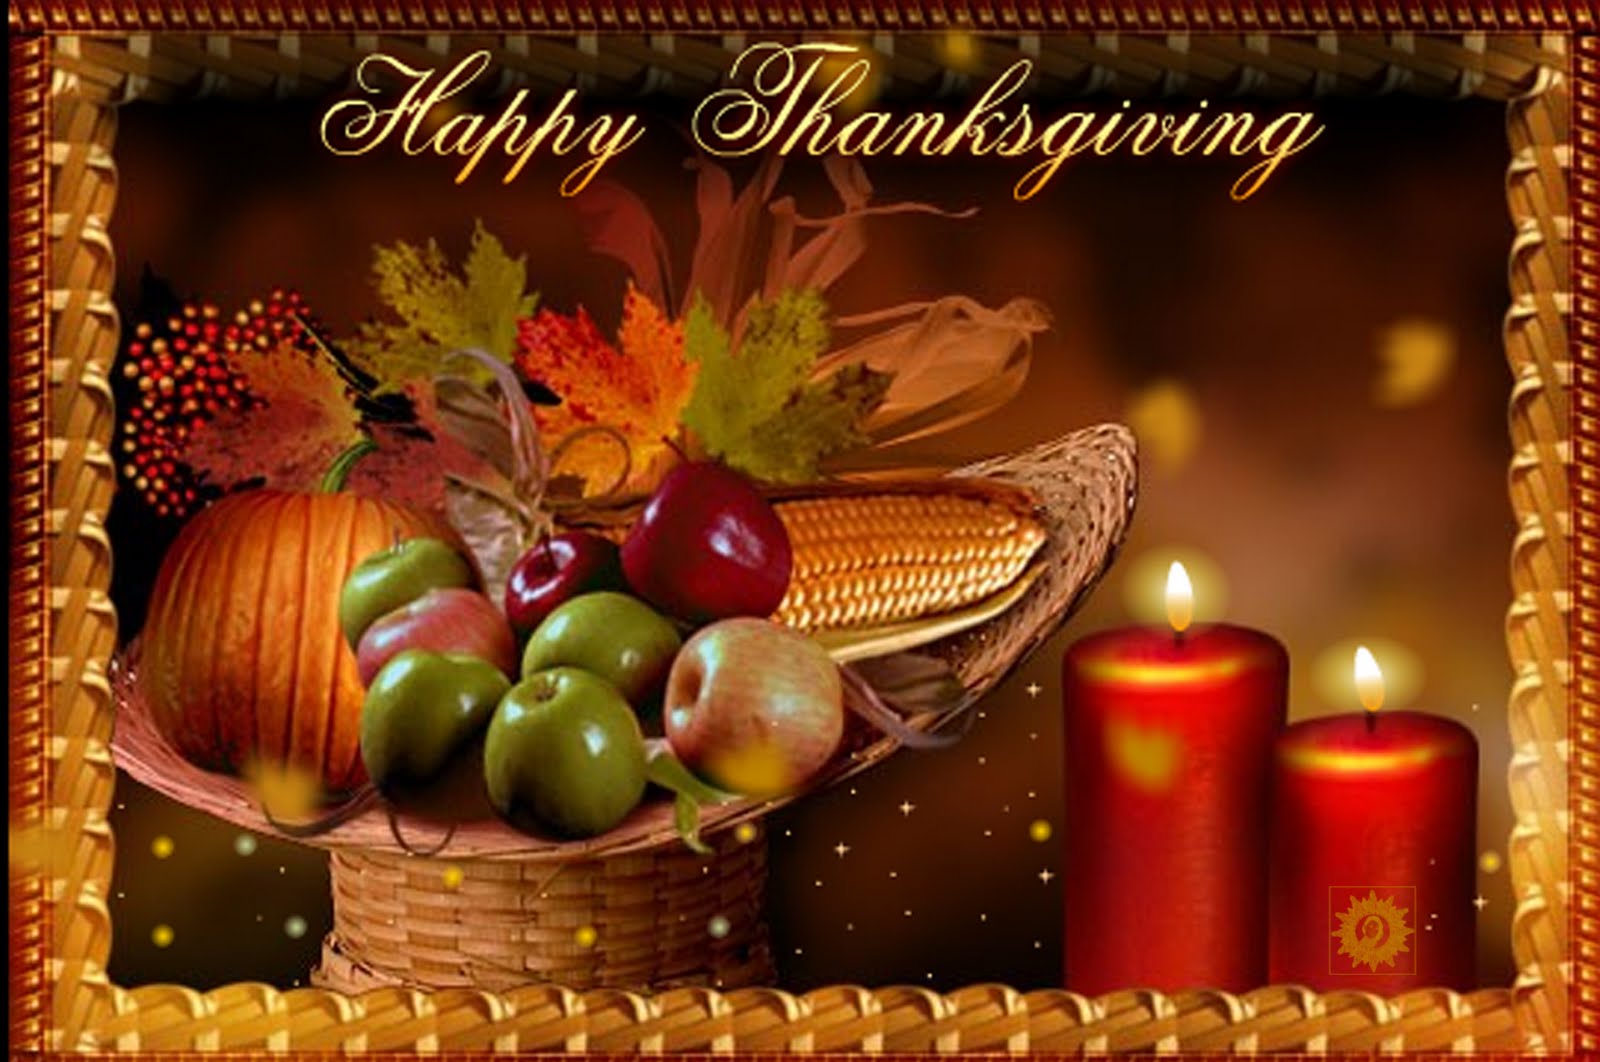 Nice And Well Manage Thanksgiving Image Happy Wallpaper